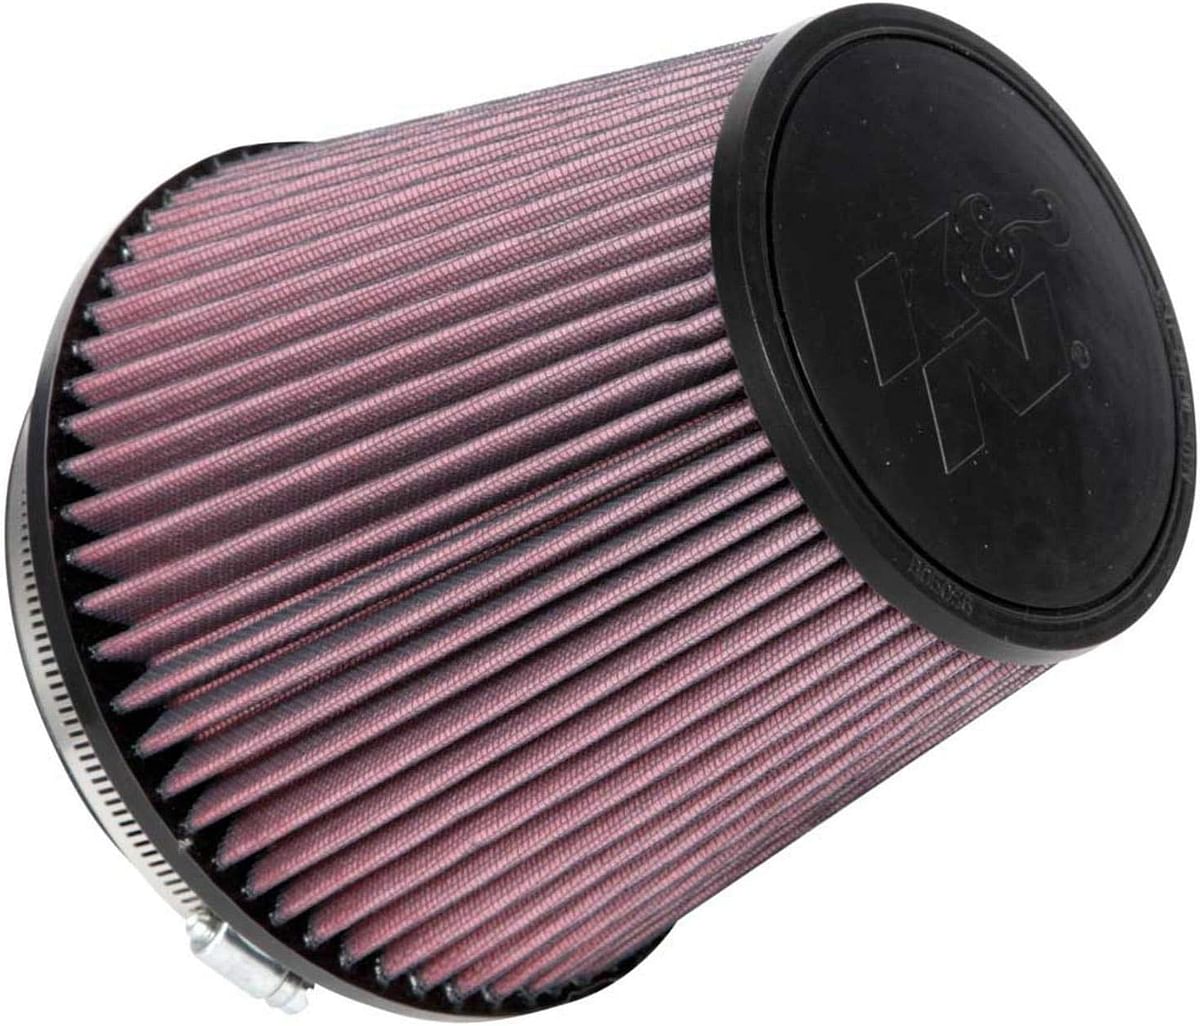 K&N Universal Clamp-On Air Intake Filter: High Performance, Premium, Washable, Replacement Flange Diameter: 6 In, Filter Height: 6.5 Length: 1 Shape: Round Tapered, Ru-1042